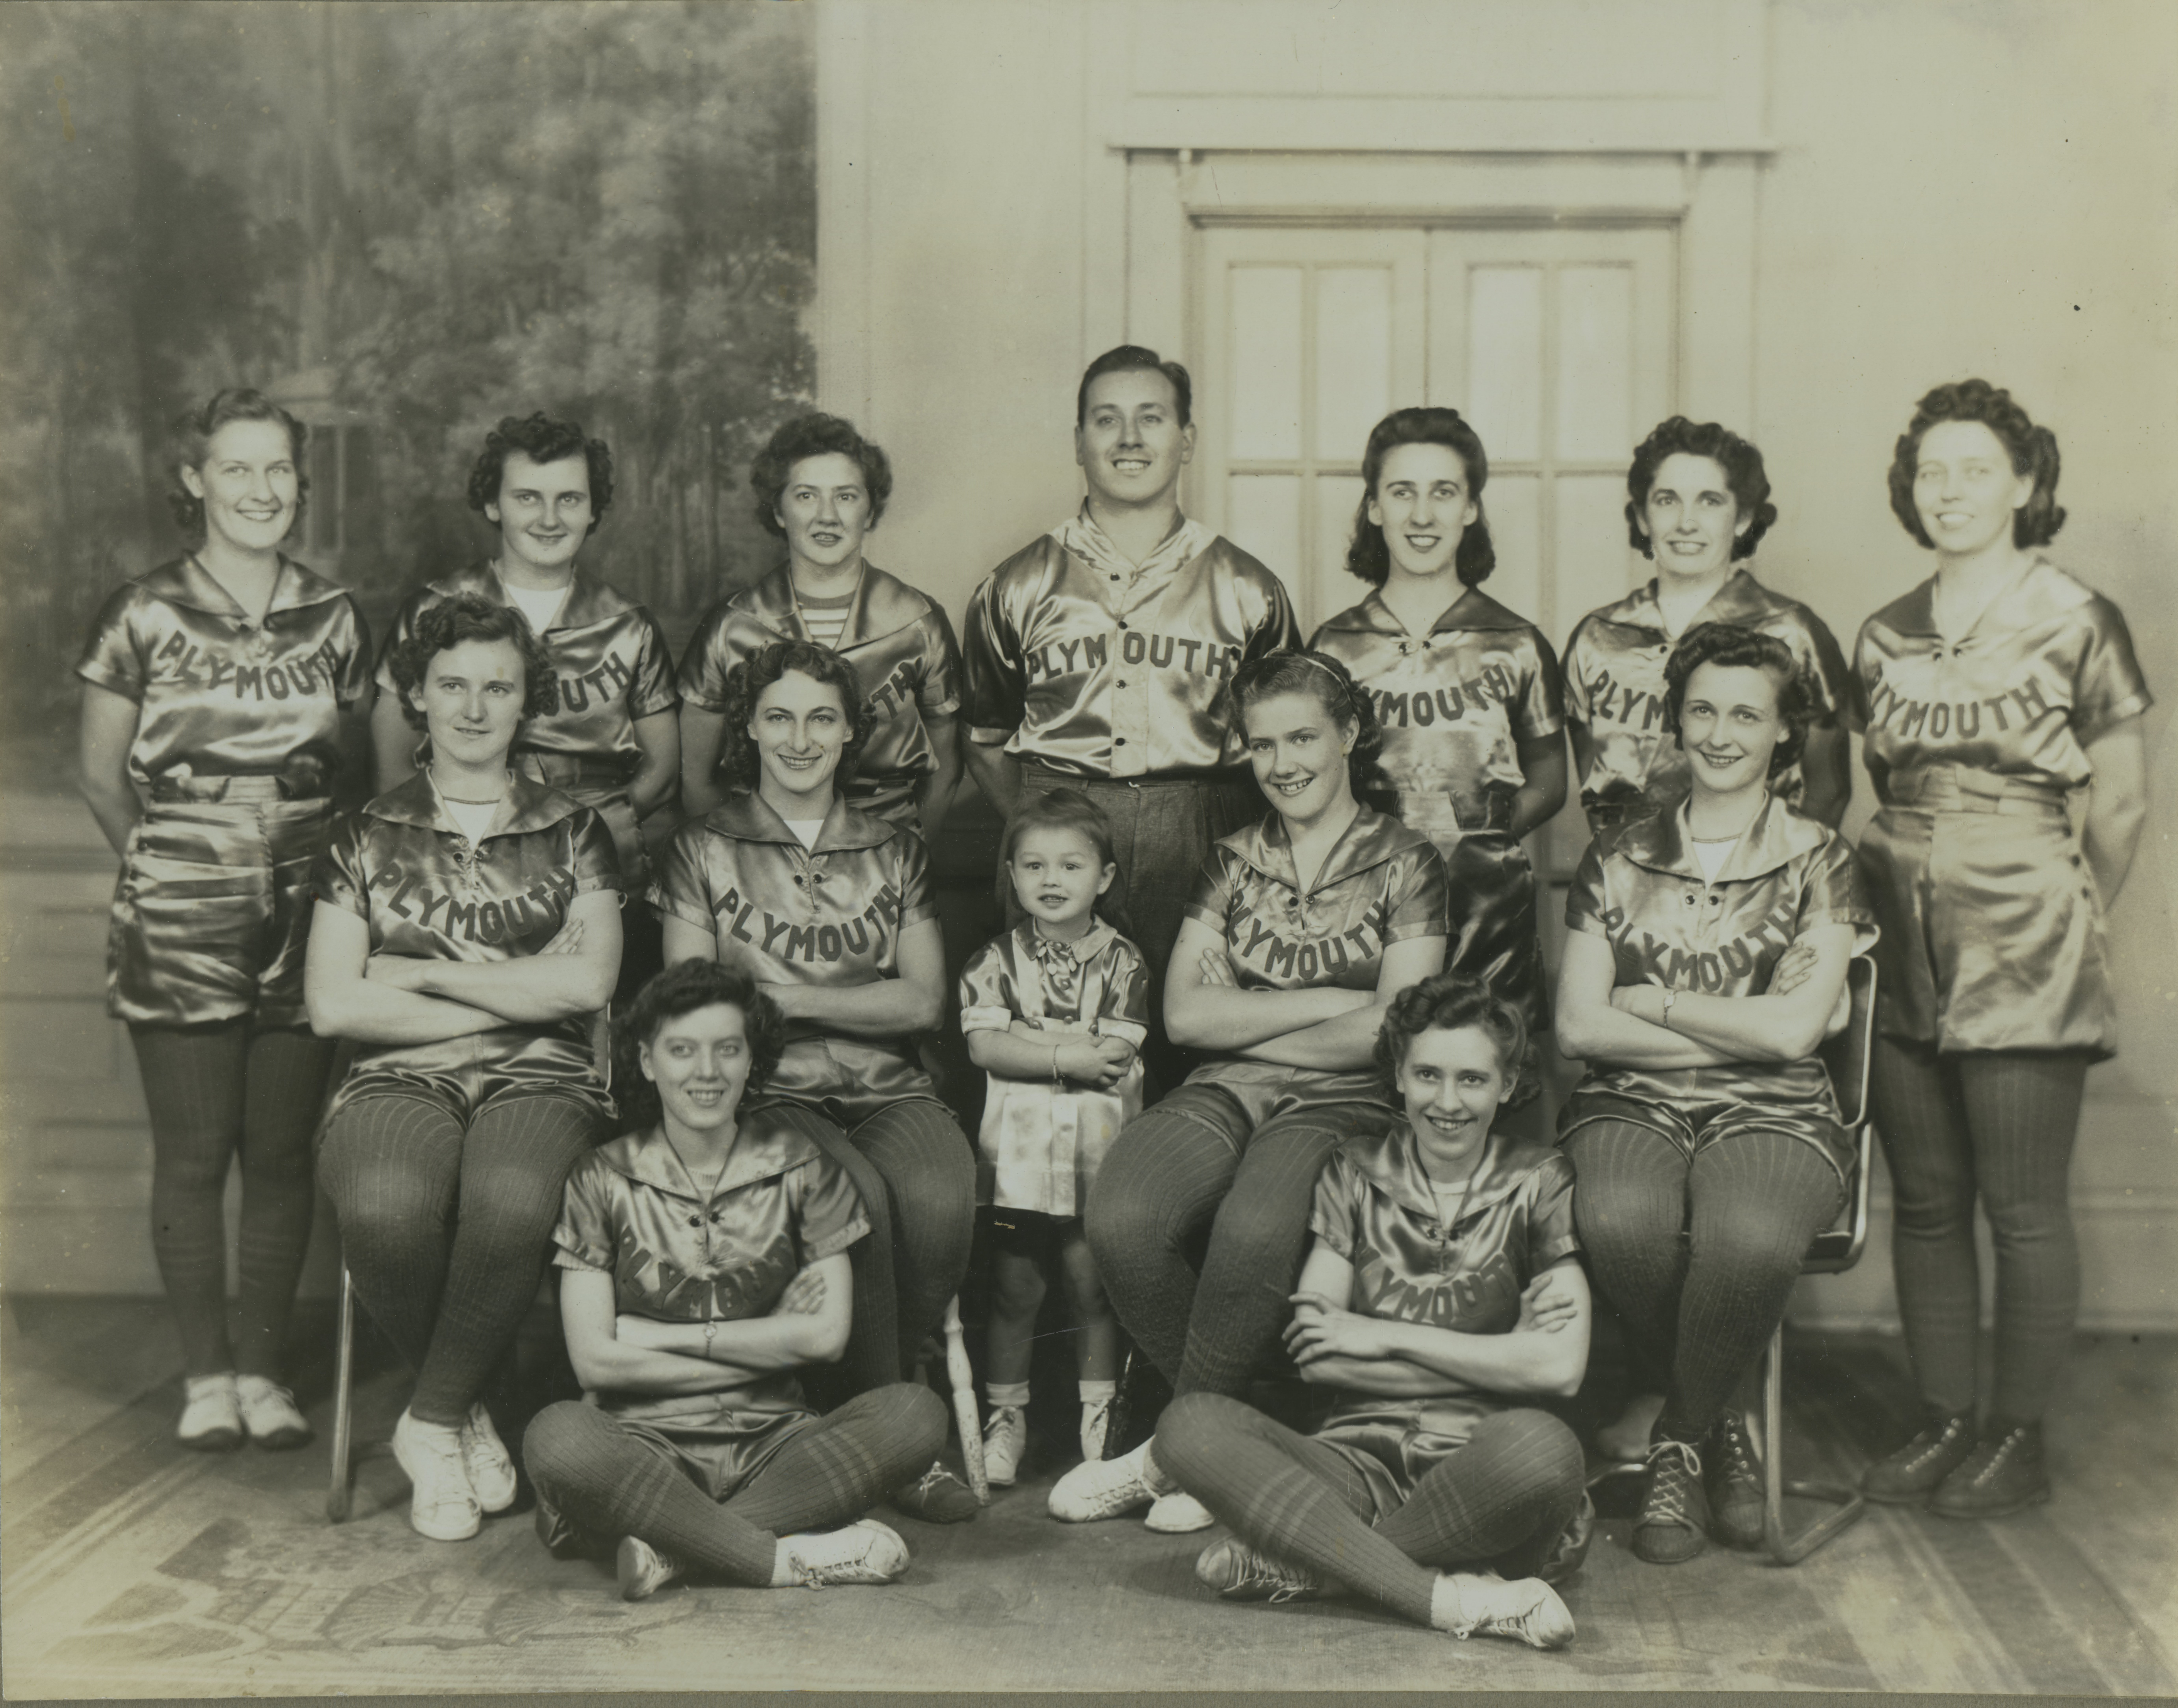 A group of women in their softball jerseys pose for a photo together. There are also a little girl and a man in the center of the group.